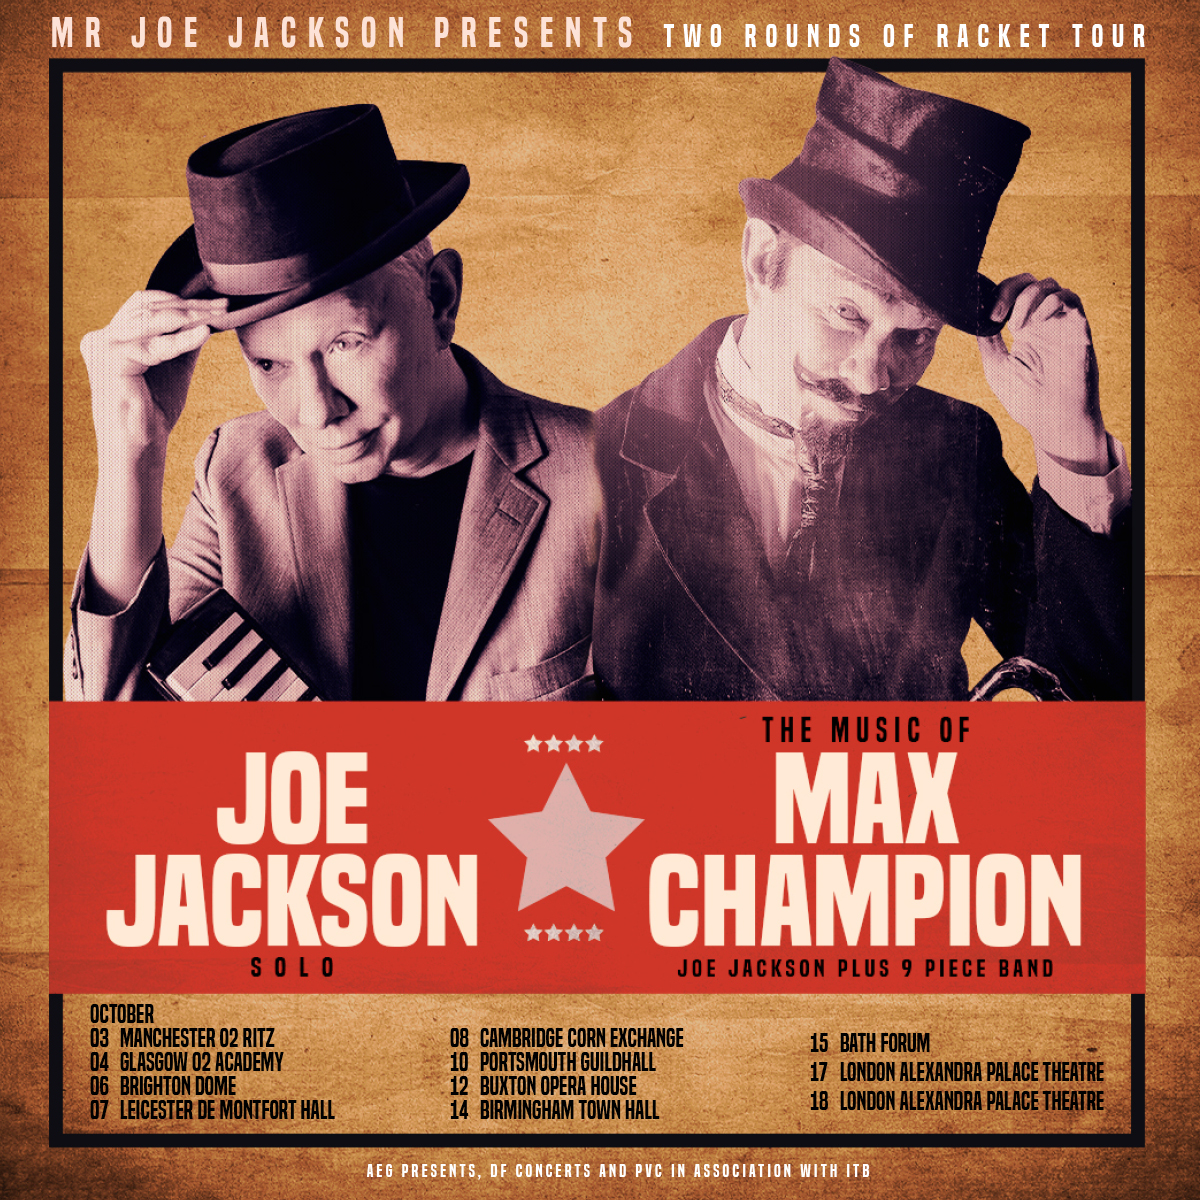 Performing a solo set of his original songs, as well as a set based on the album 'What A Racket!' - the first performance in more than 100 years, @joejacksonmusic heads here Fri 4 Oct. 🎤 🎟️ amg-venues.com/eNos50QU0Yf #O2AcademyGlasgow